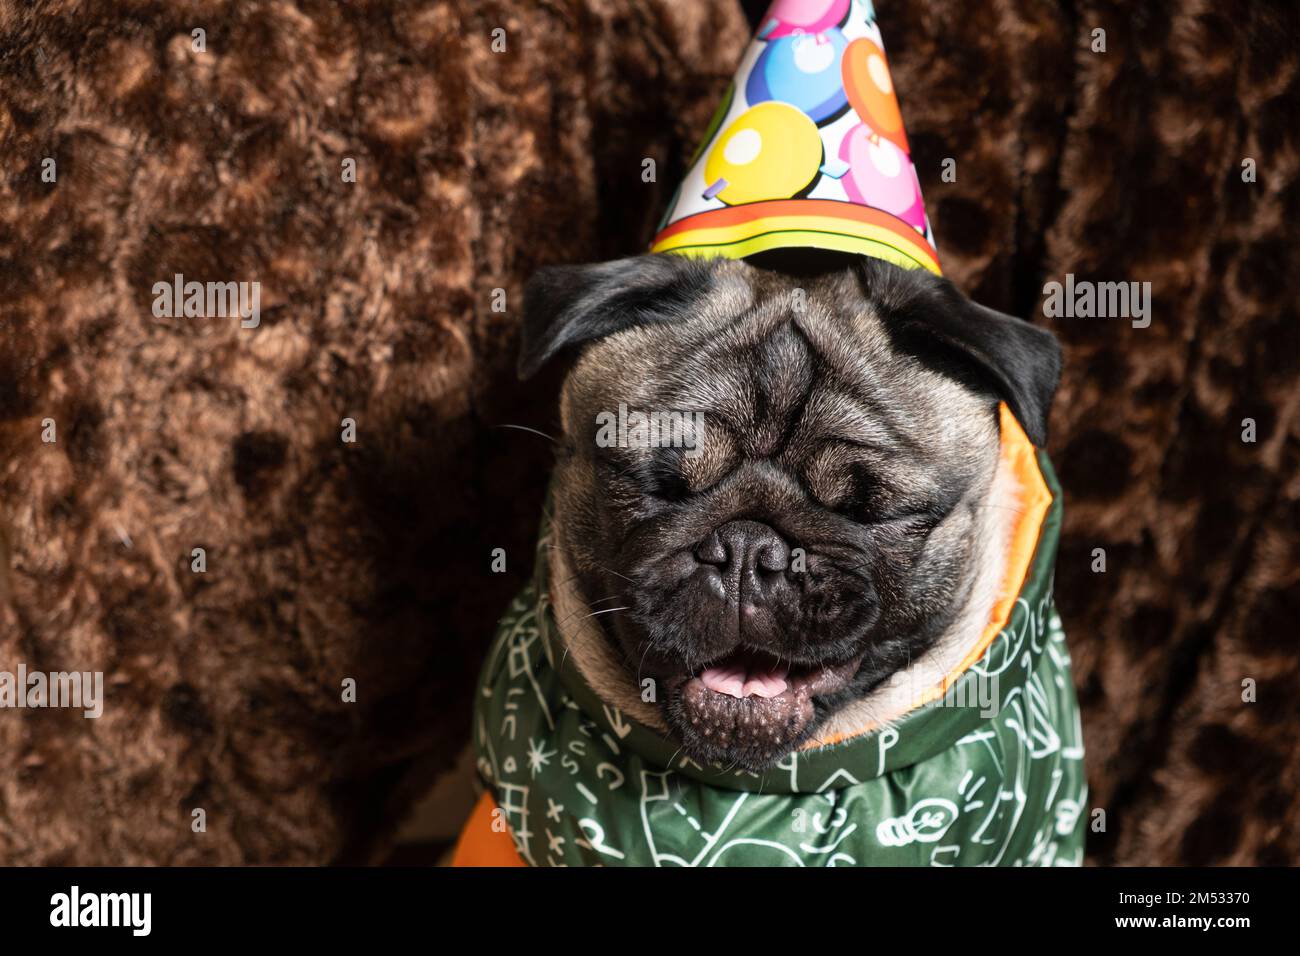 A funny pug laughs, celebrating a birthday, a festive cap on his head, place for text. Stock Photo